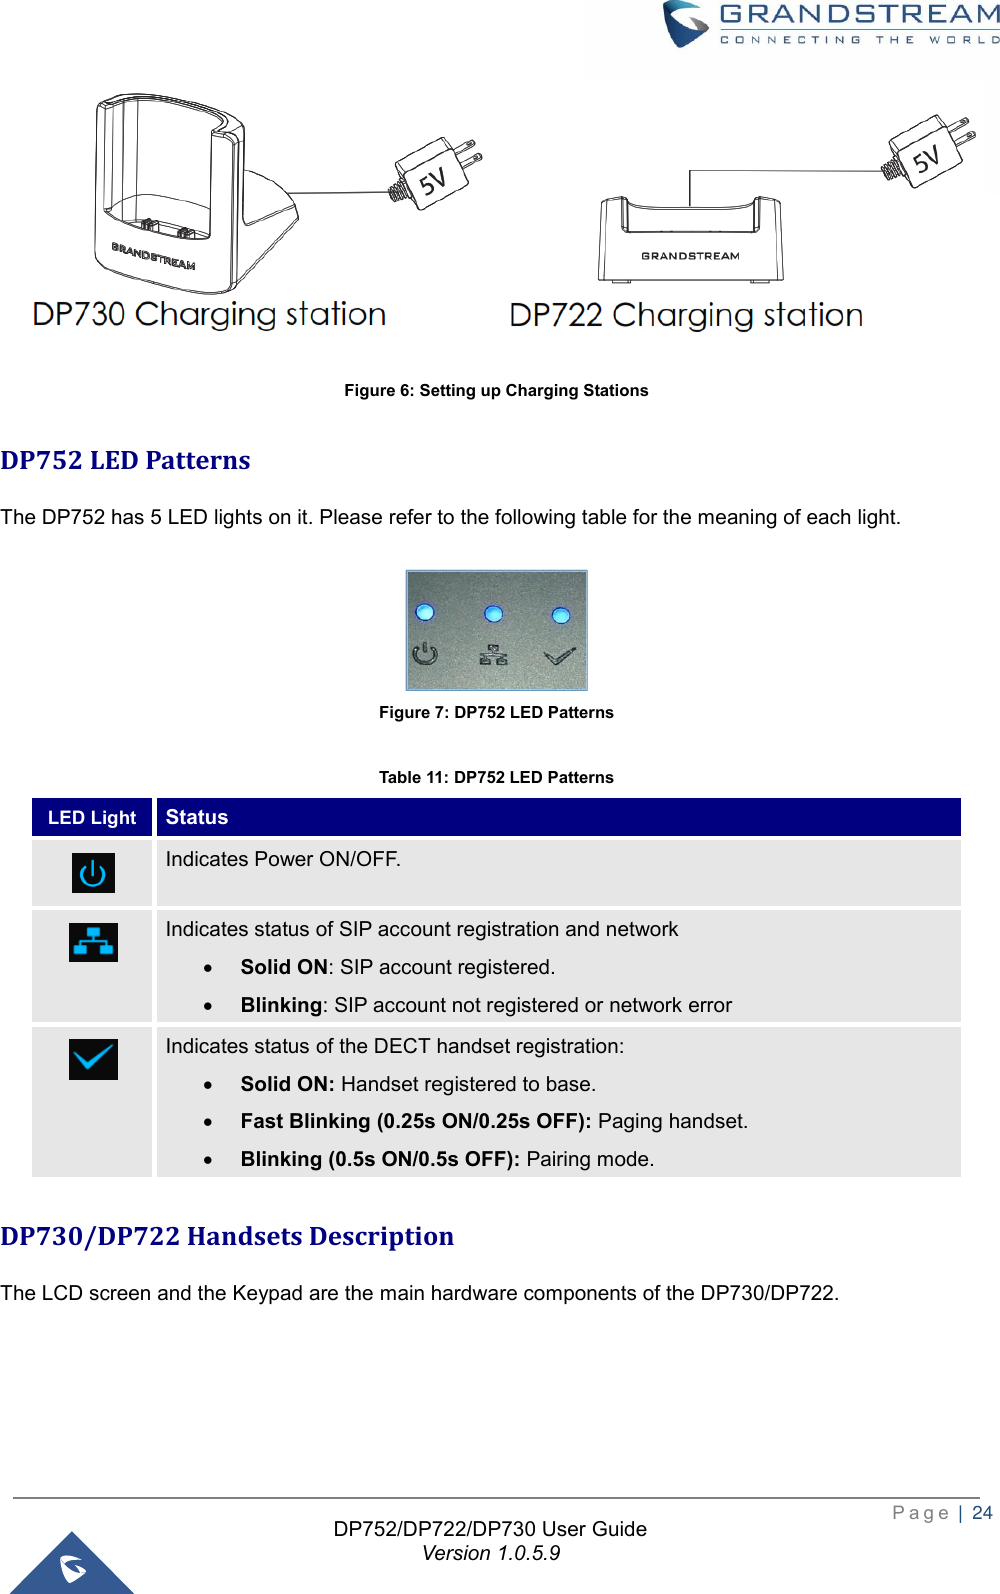  P a g e  |  24   DP752/DP722/DP730 User Guide Version 1.0.5.9     Figure 6: Setting up Charging Stations DP752 LED Patterns The DP752 has 5 LED lights on it. Please refer to the following table for the meaning of each light.     Figure 7: DP752 LED Patterns  Table 11: DP752 LED Patterns DP730/DP722 Handsets Description The LCD screen and the Keypad are the main hardware components of the DP730/DP722.     LED Light Status  Indicates Power ON/OFF.  Indicates status of SIP account registration and network • Solid ON: SIP account registered.     • Blinking: SIP account not registered or network error  Indicates status of the DECT handset registration: • Solid ON: Handset registered to base. • Fast Blinking (0.25s ON/0.25s OFF): Paging handset. • Blinking (0.5s ON/0.5s OFF): Pairing mode. 